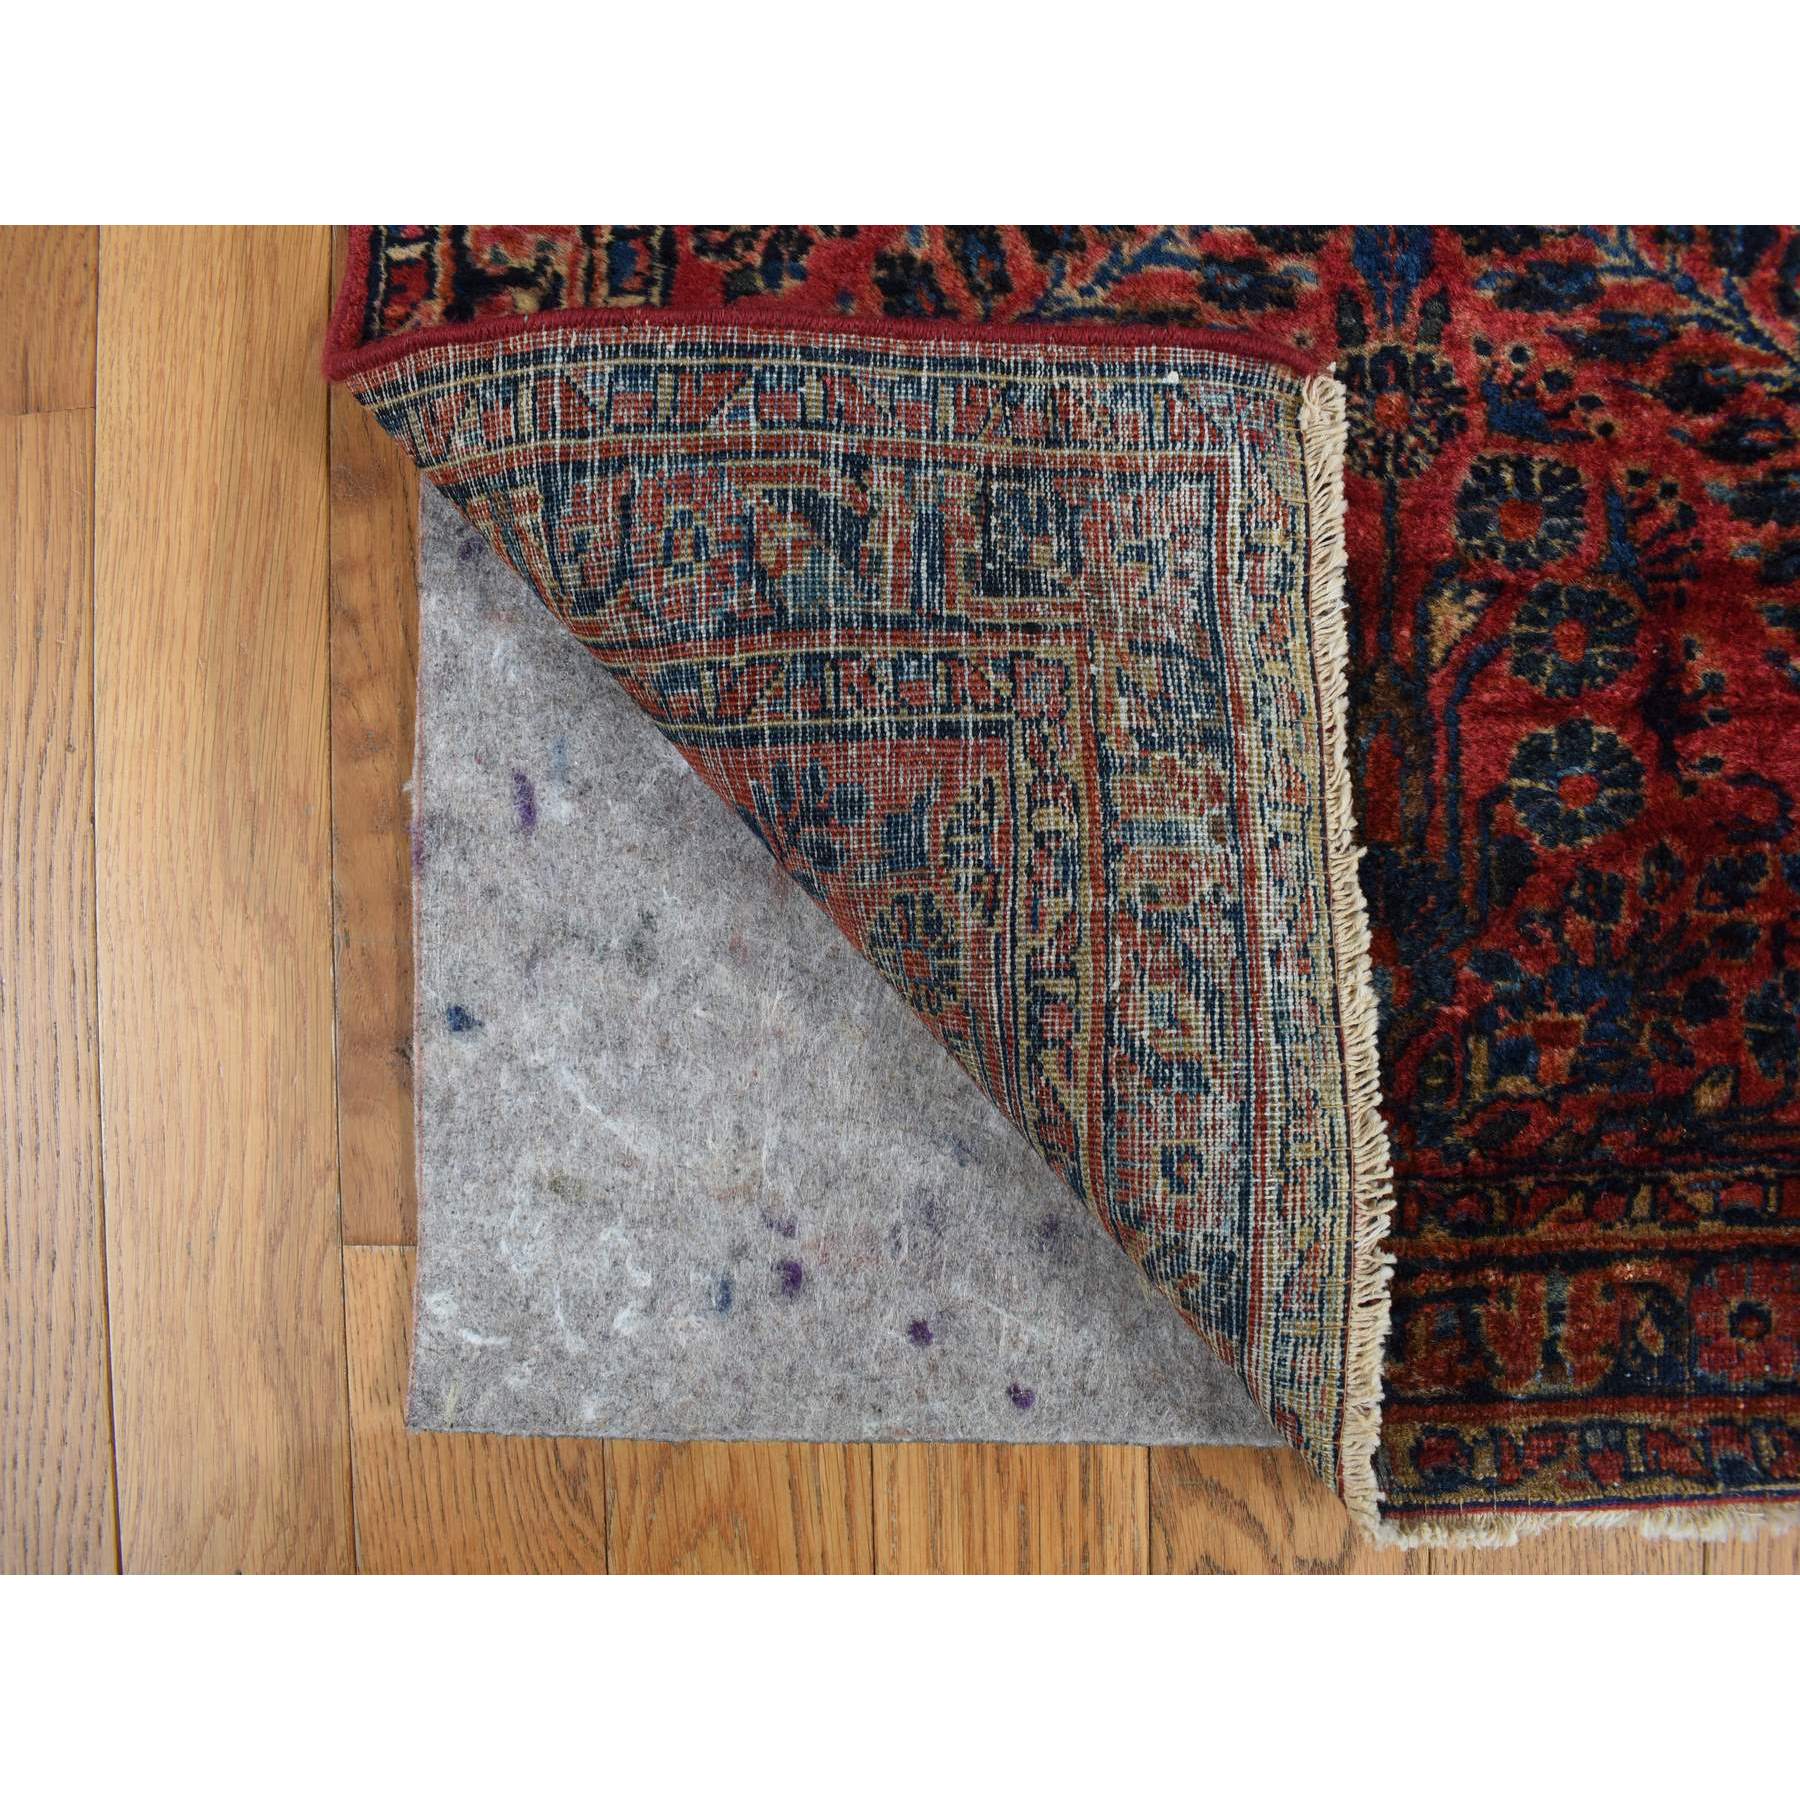  Wool Hand-Knotted Area Rug 2'2